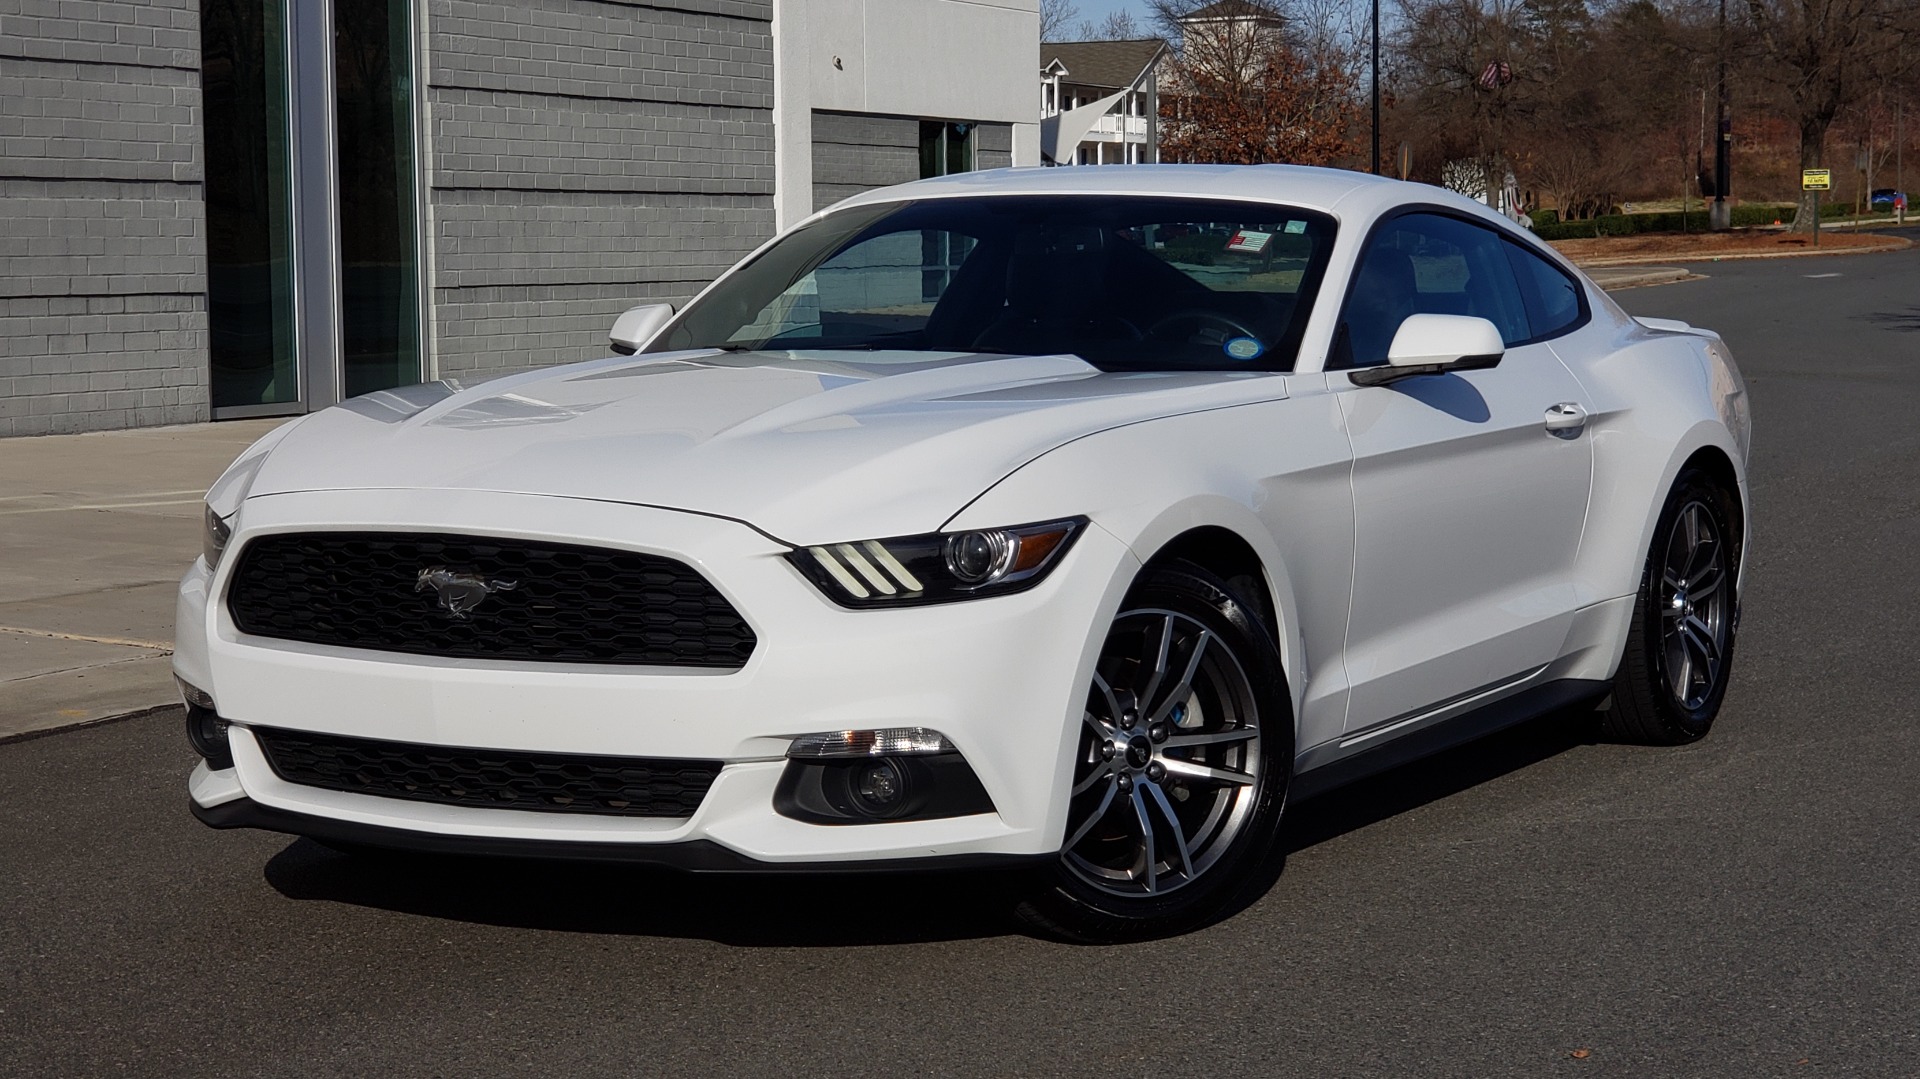 Used 2017 Ford MUSTANG PREMIUM COUPE 2.3L ECOBOOST / AUTO / 18-IN WHEELS / REARVIEW for sale Sold at Formula Imports in Charlotte NC 28227 2